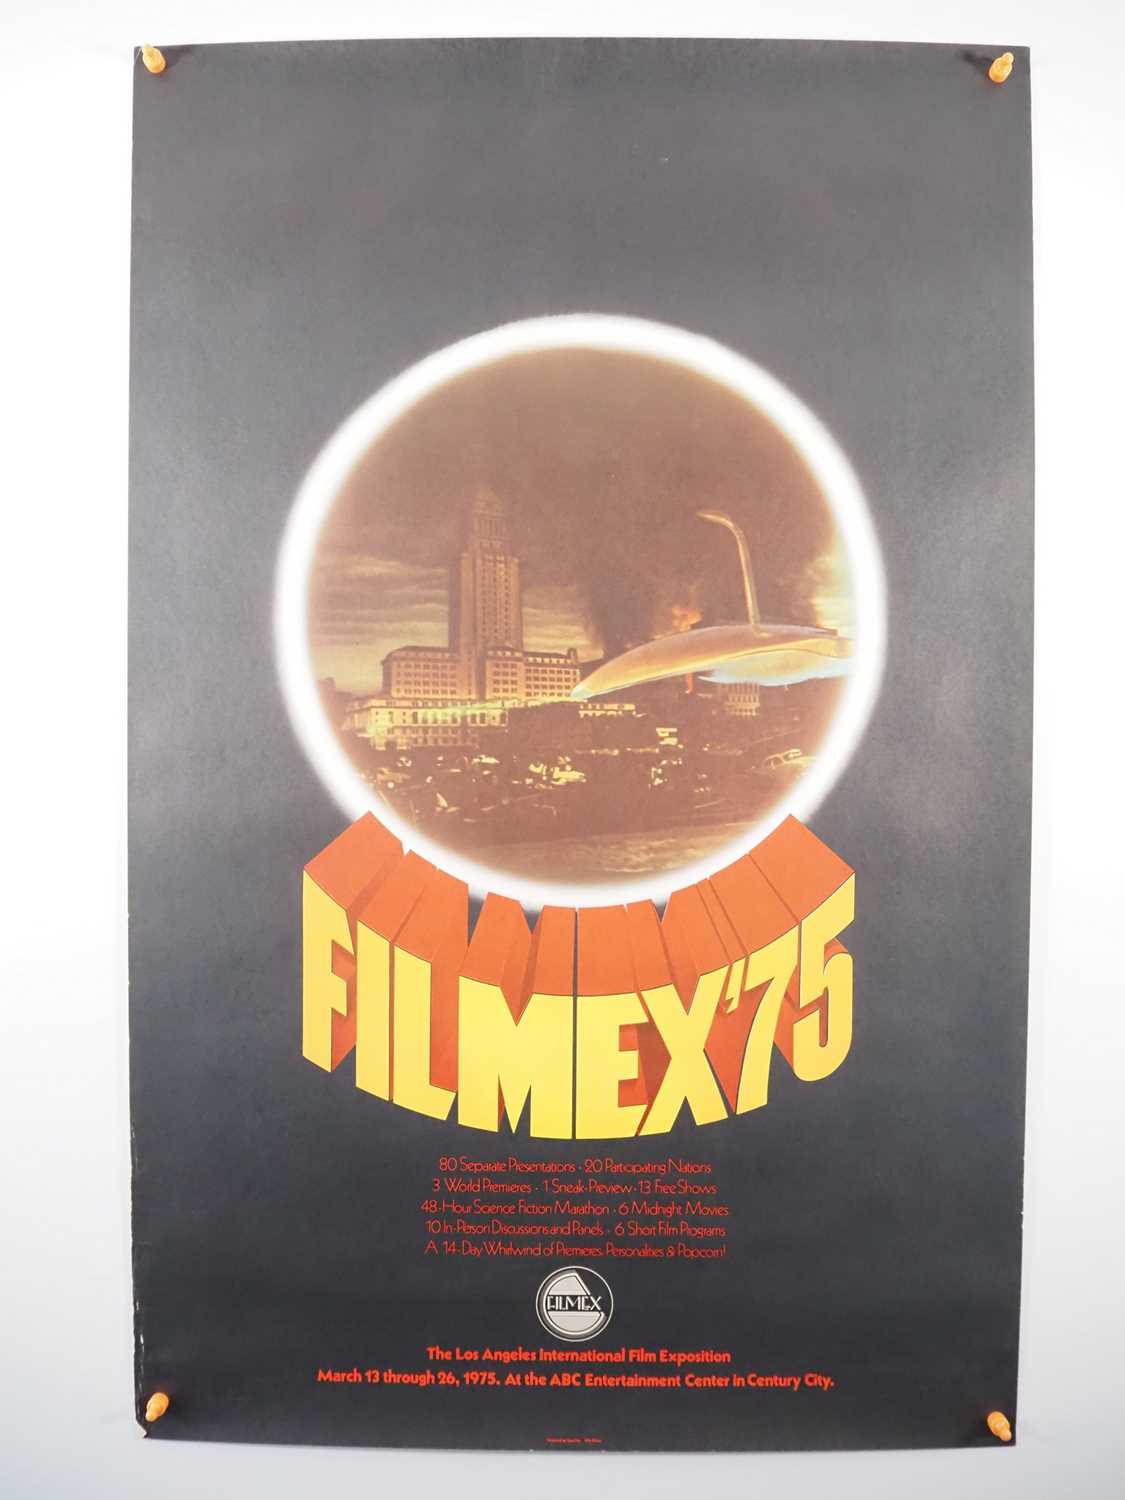 FILMEX (1975) - A promotional poster for the Los Angeles International Film Exposition (FILMEX) in